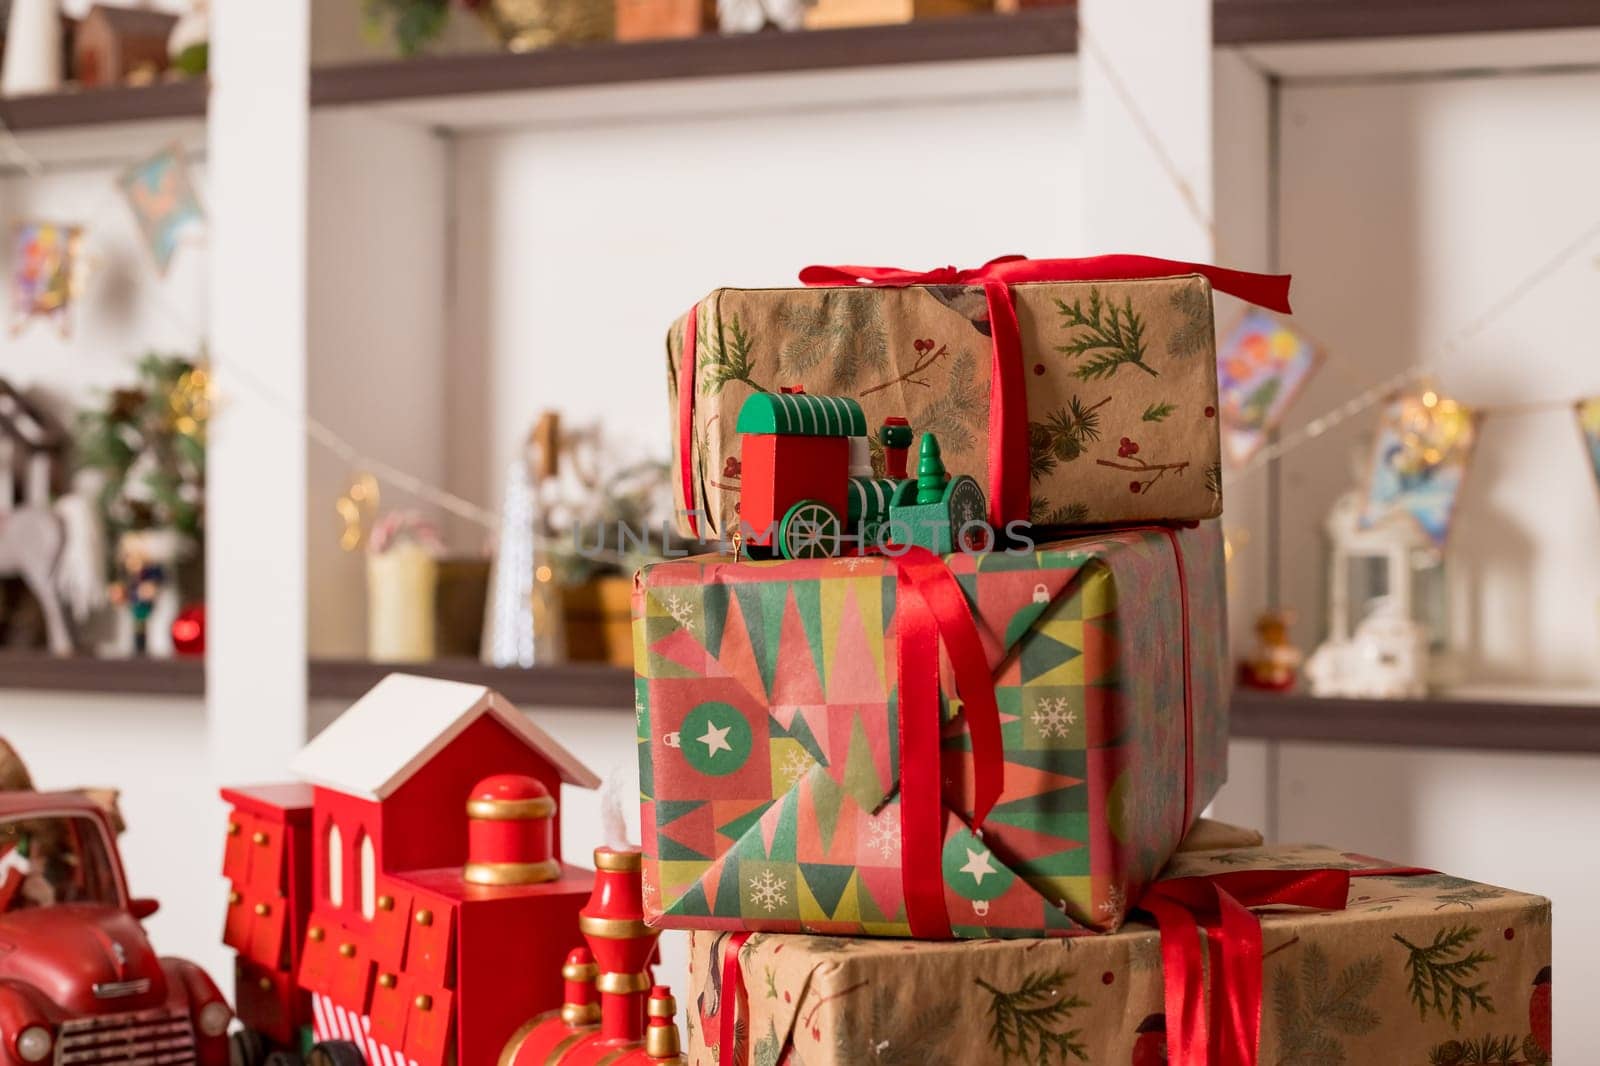 Stacks of Christmas presents. Christmas preparation concept. Stack of different colorful boxes for every family member. Pile of gifts in bright festive wrapping. by YuliaYaspe1979